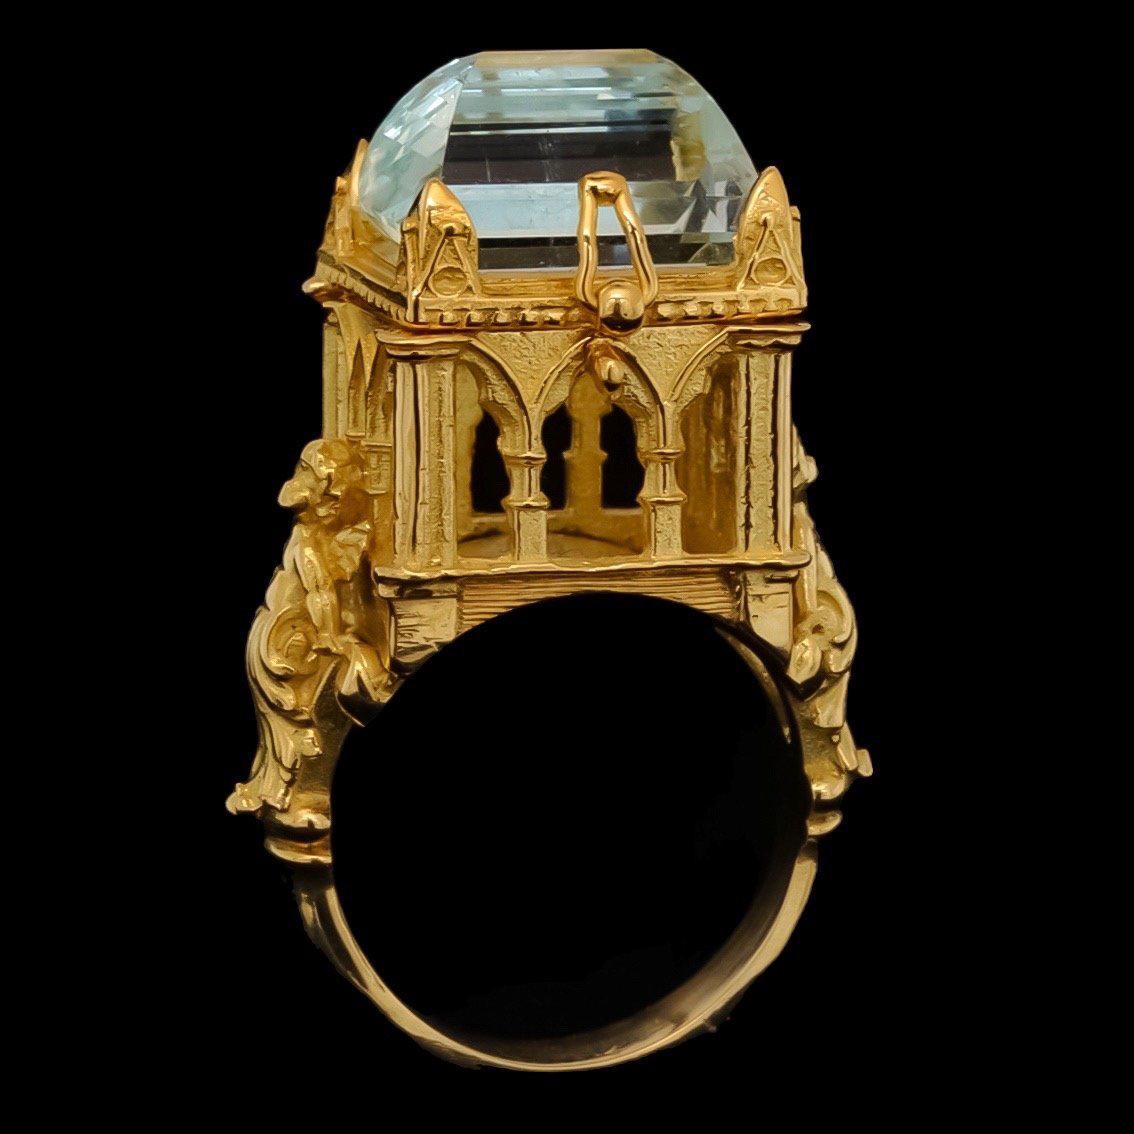 Galerie des Glaces Cathedral Poison Ring in 18 Karat Yellow Gold with Aquamarine 7